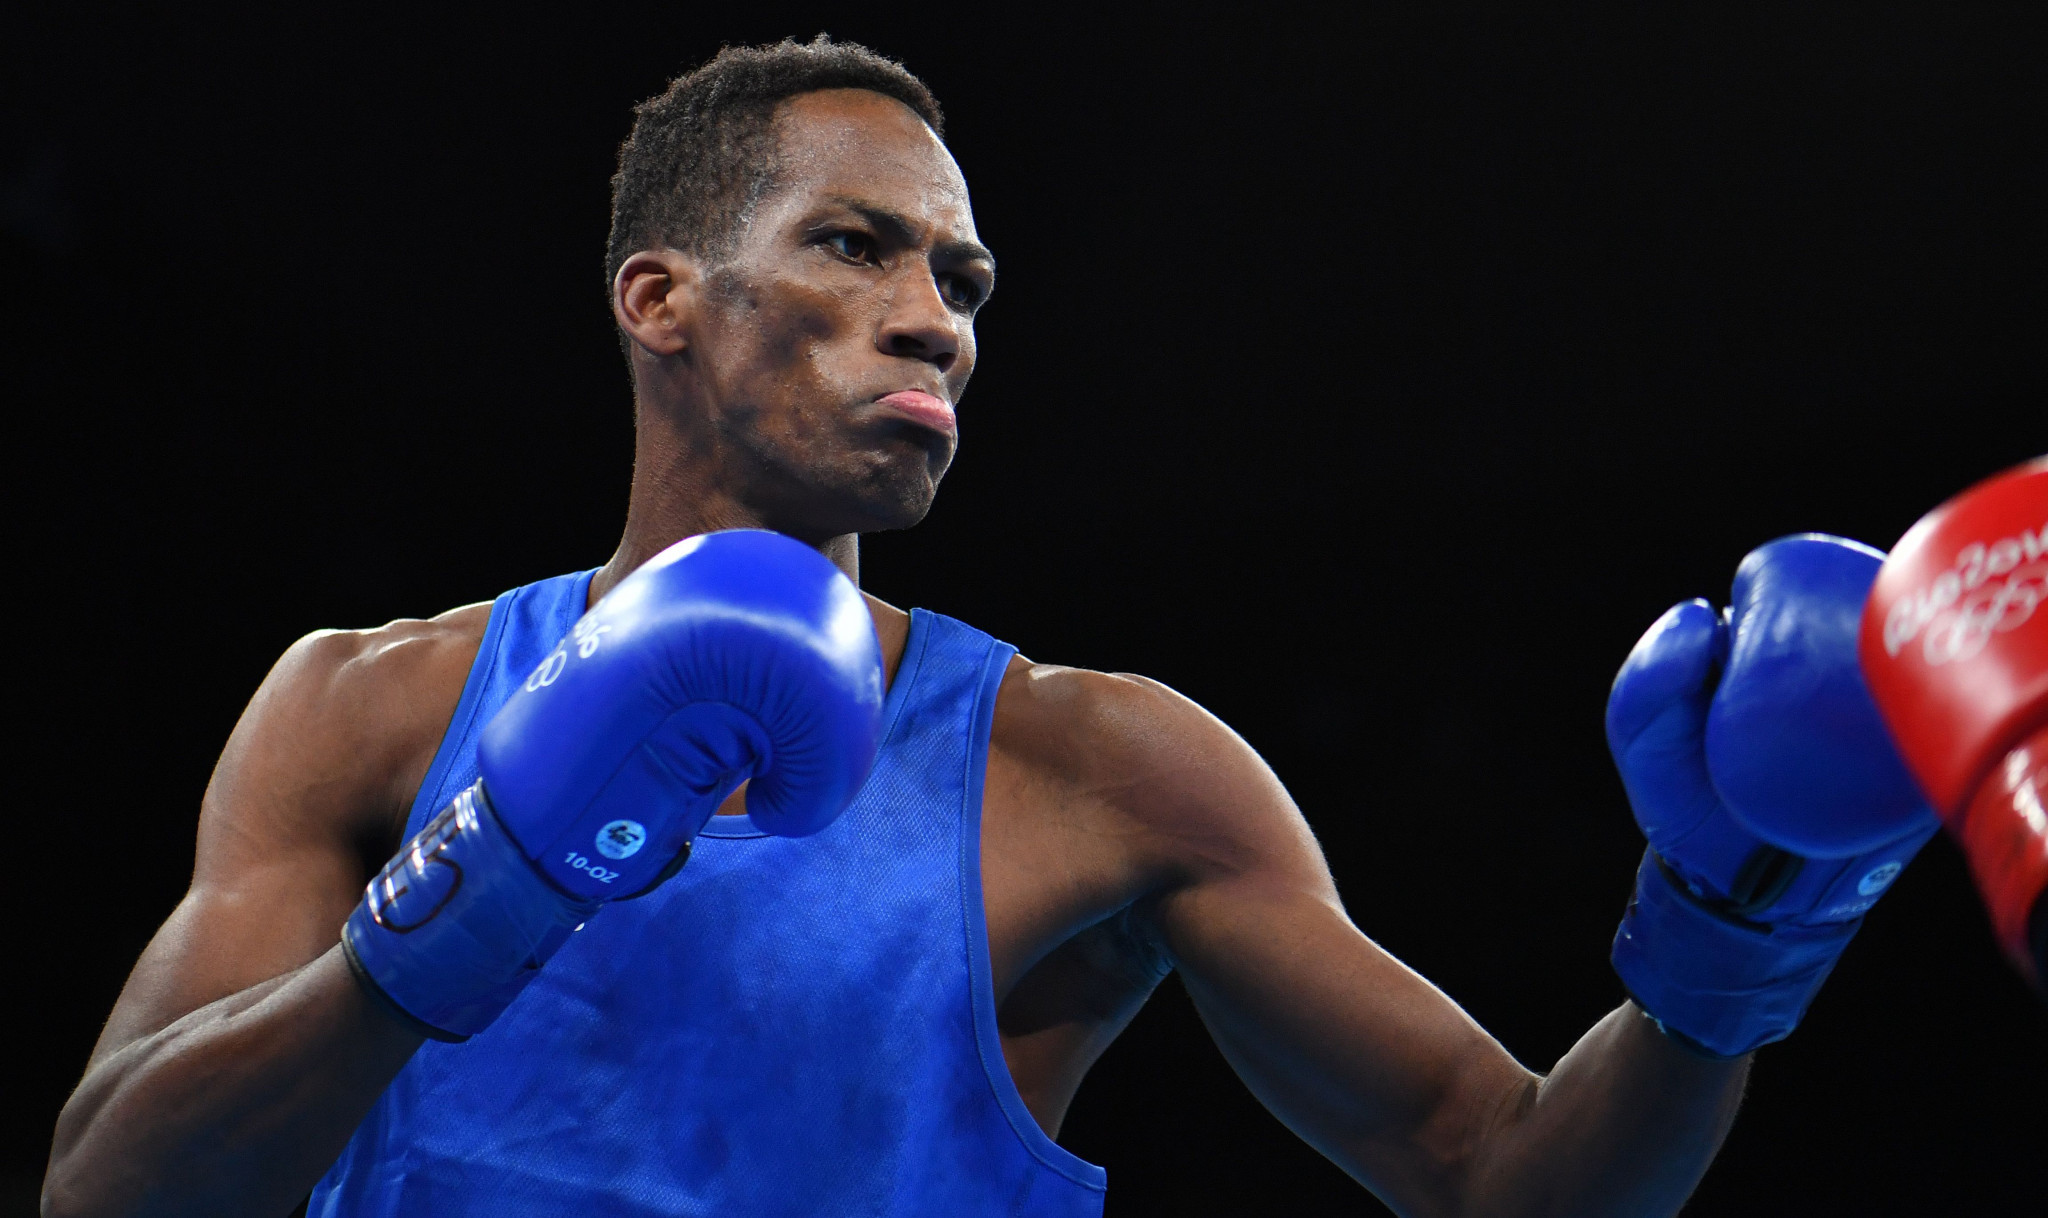 Olympic silver medallist Sotomayor suffers defeat to Kramou at AIBA World Championships